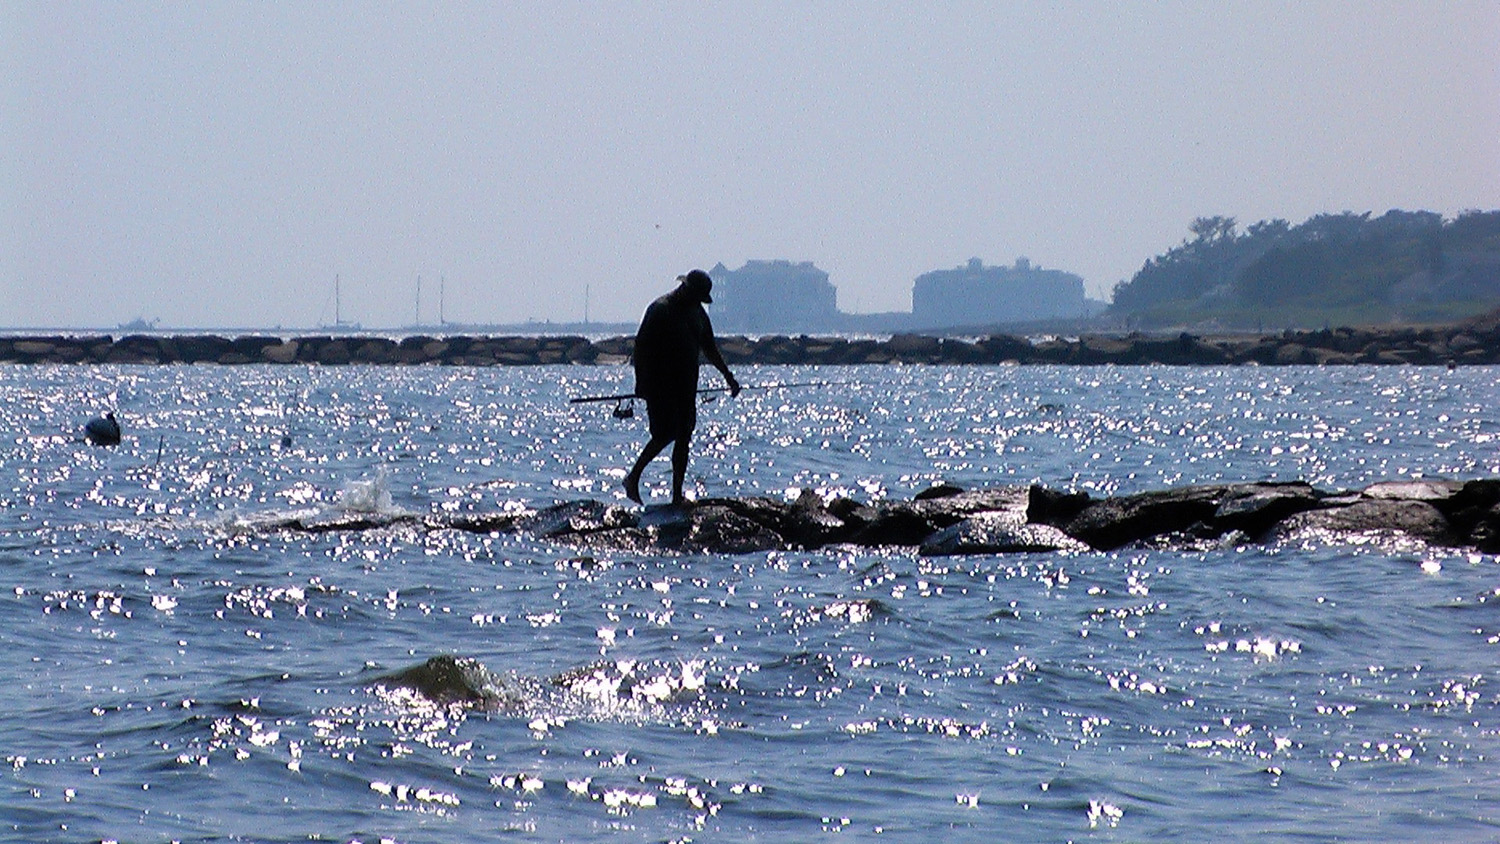 Fishing from a jetty